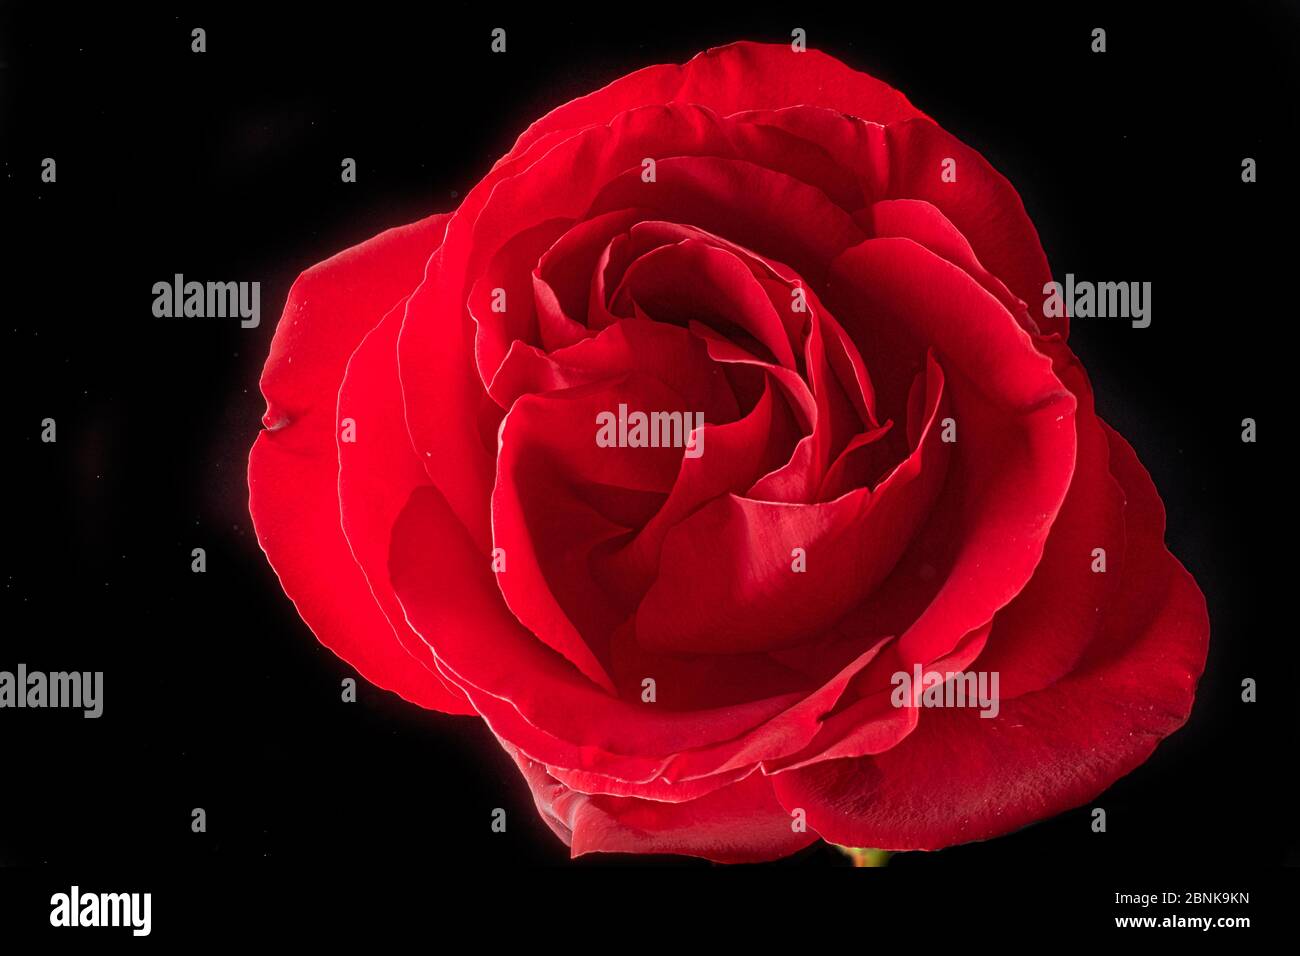 Vivid colour of a single red rose Stock Photo